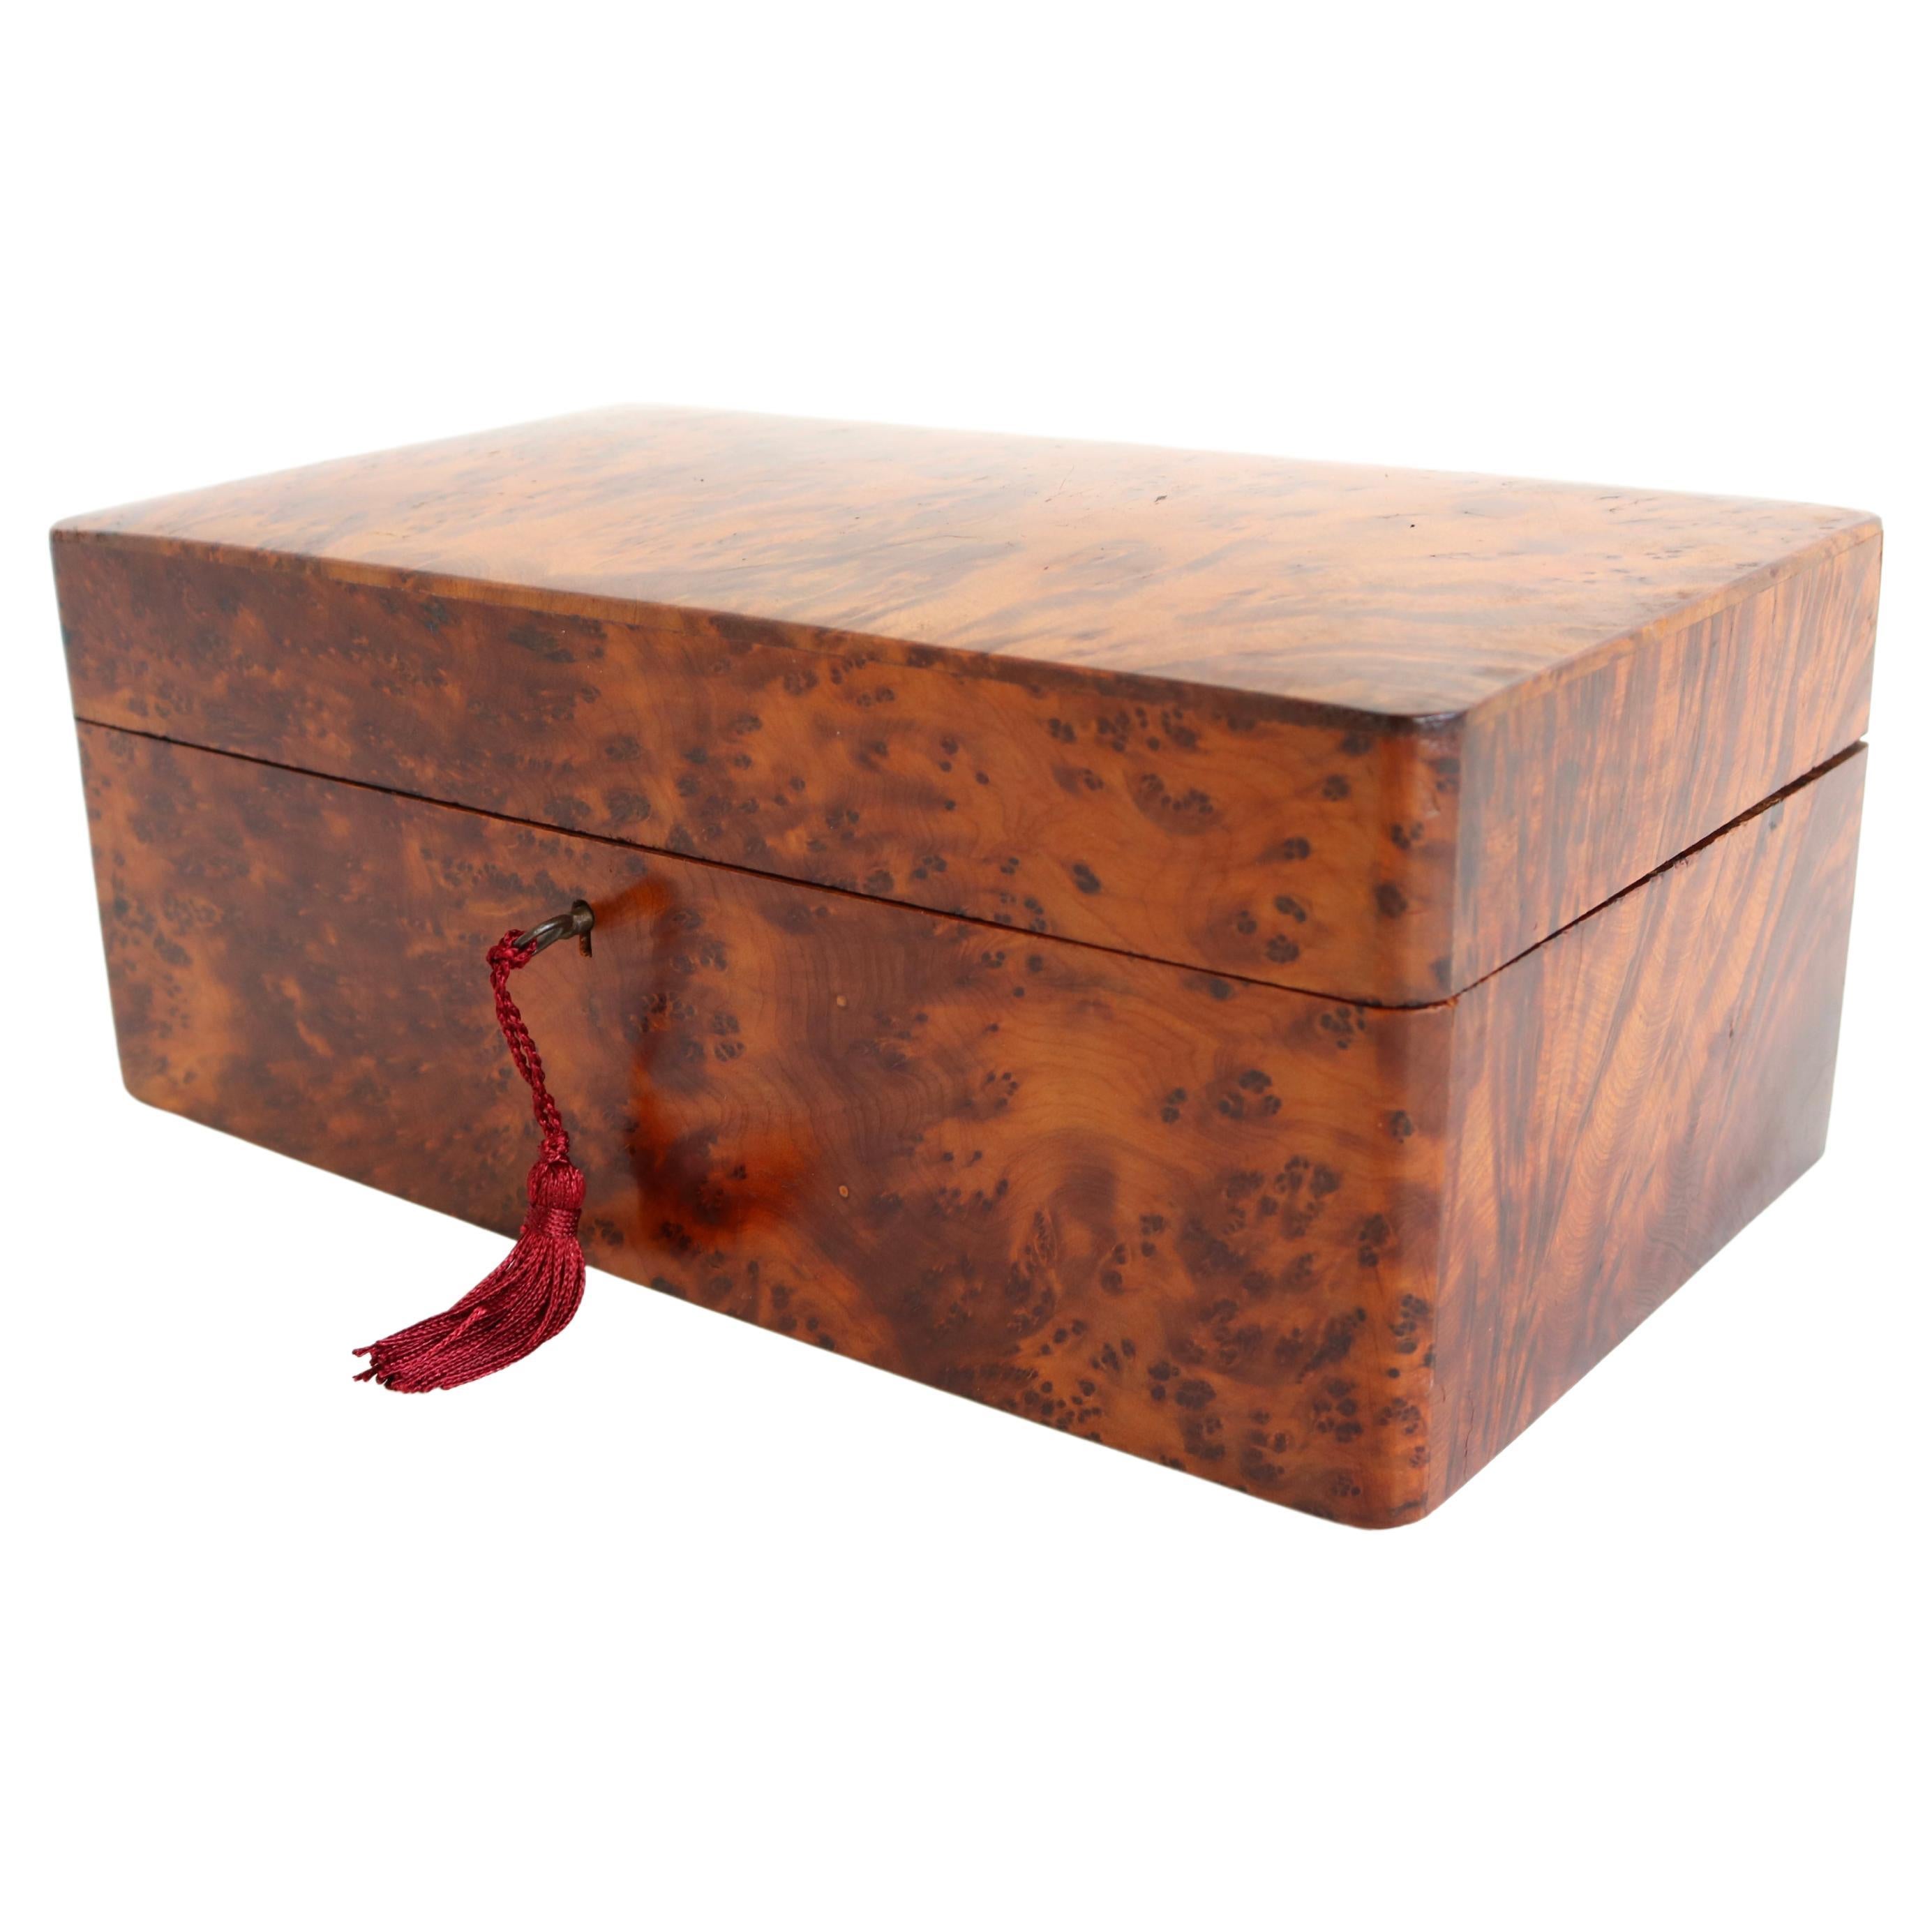 Marvelous 19th Century French Antique Jewelry Box Napoleon III in Burl Wood For Sale